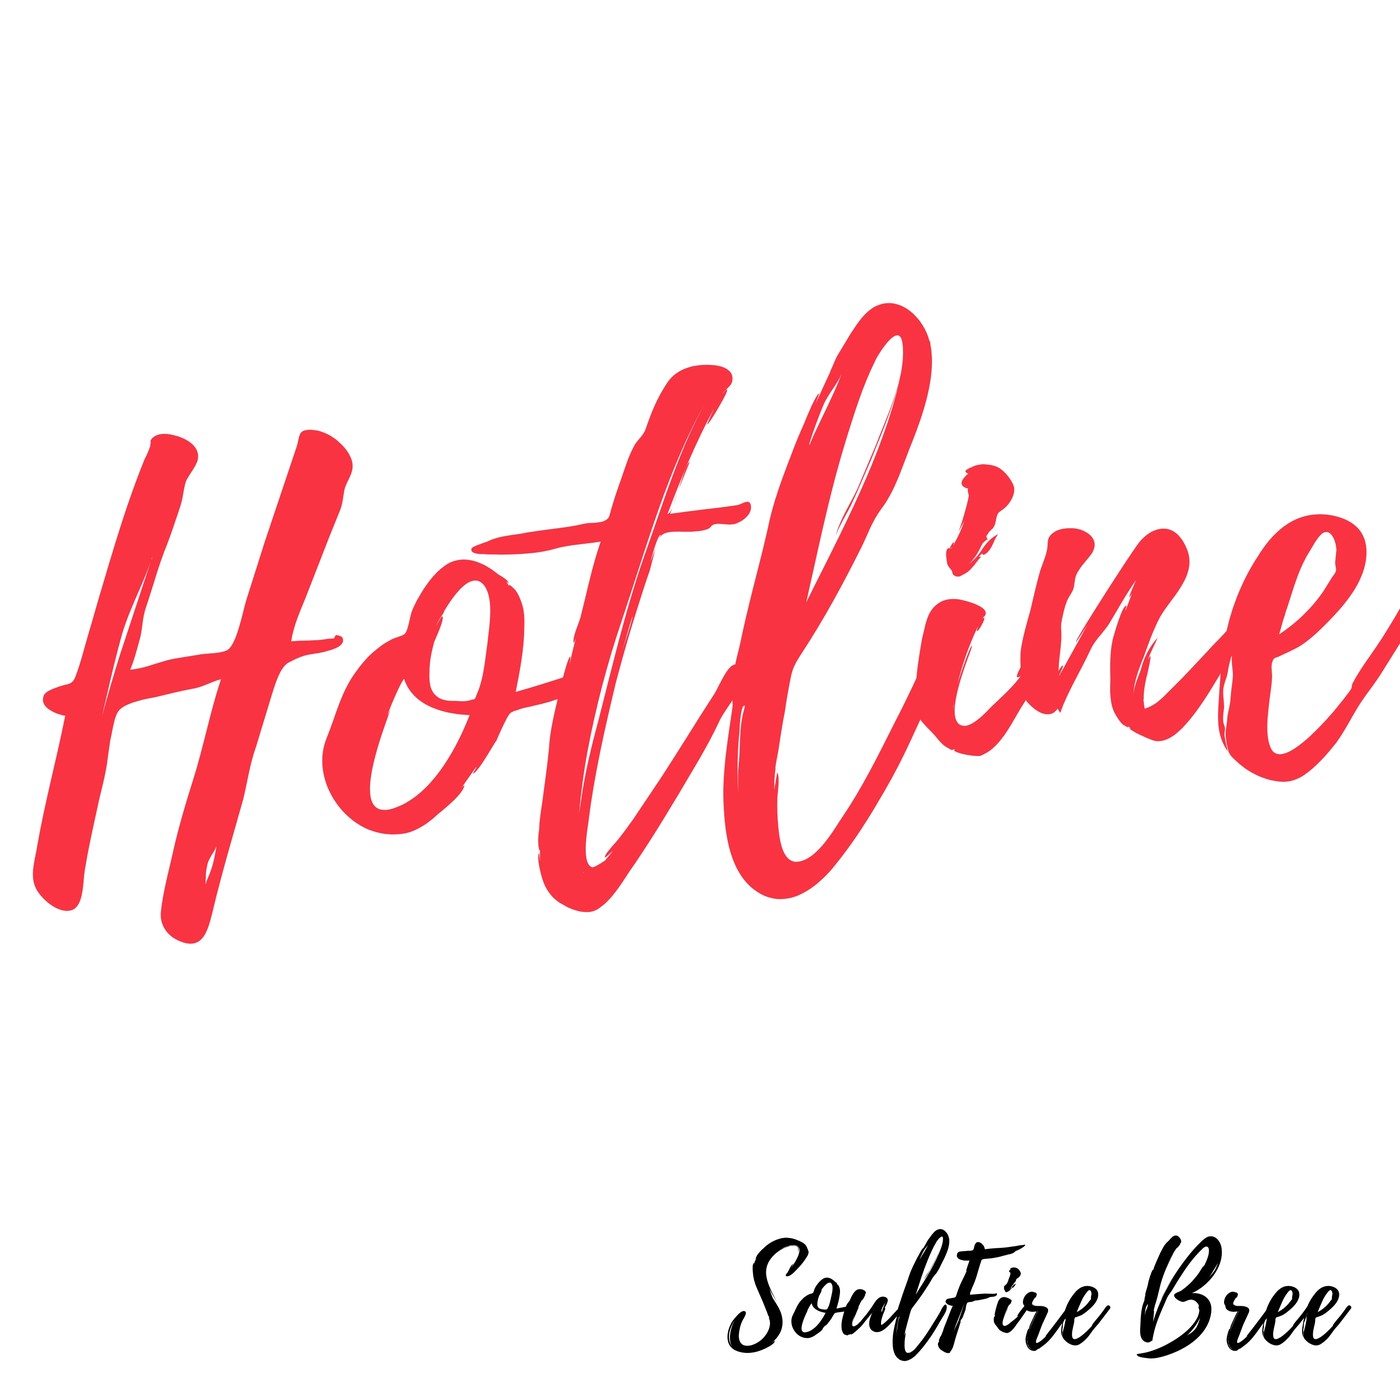 Art for Hotline by Soulfire Bree